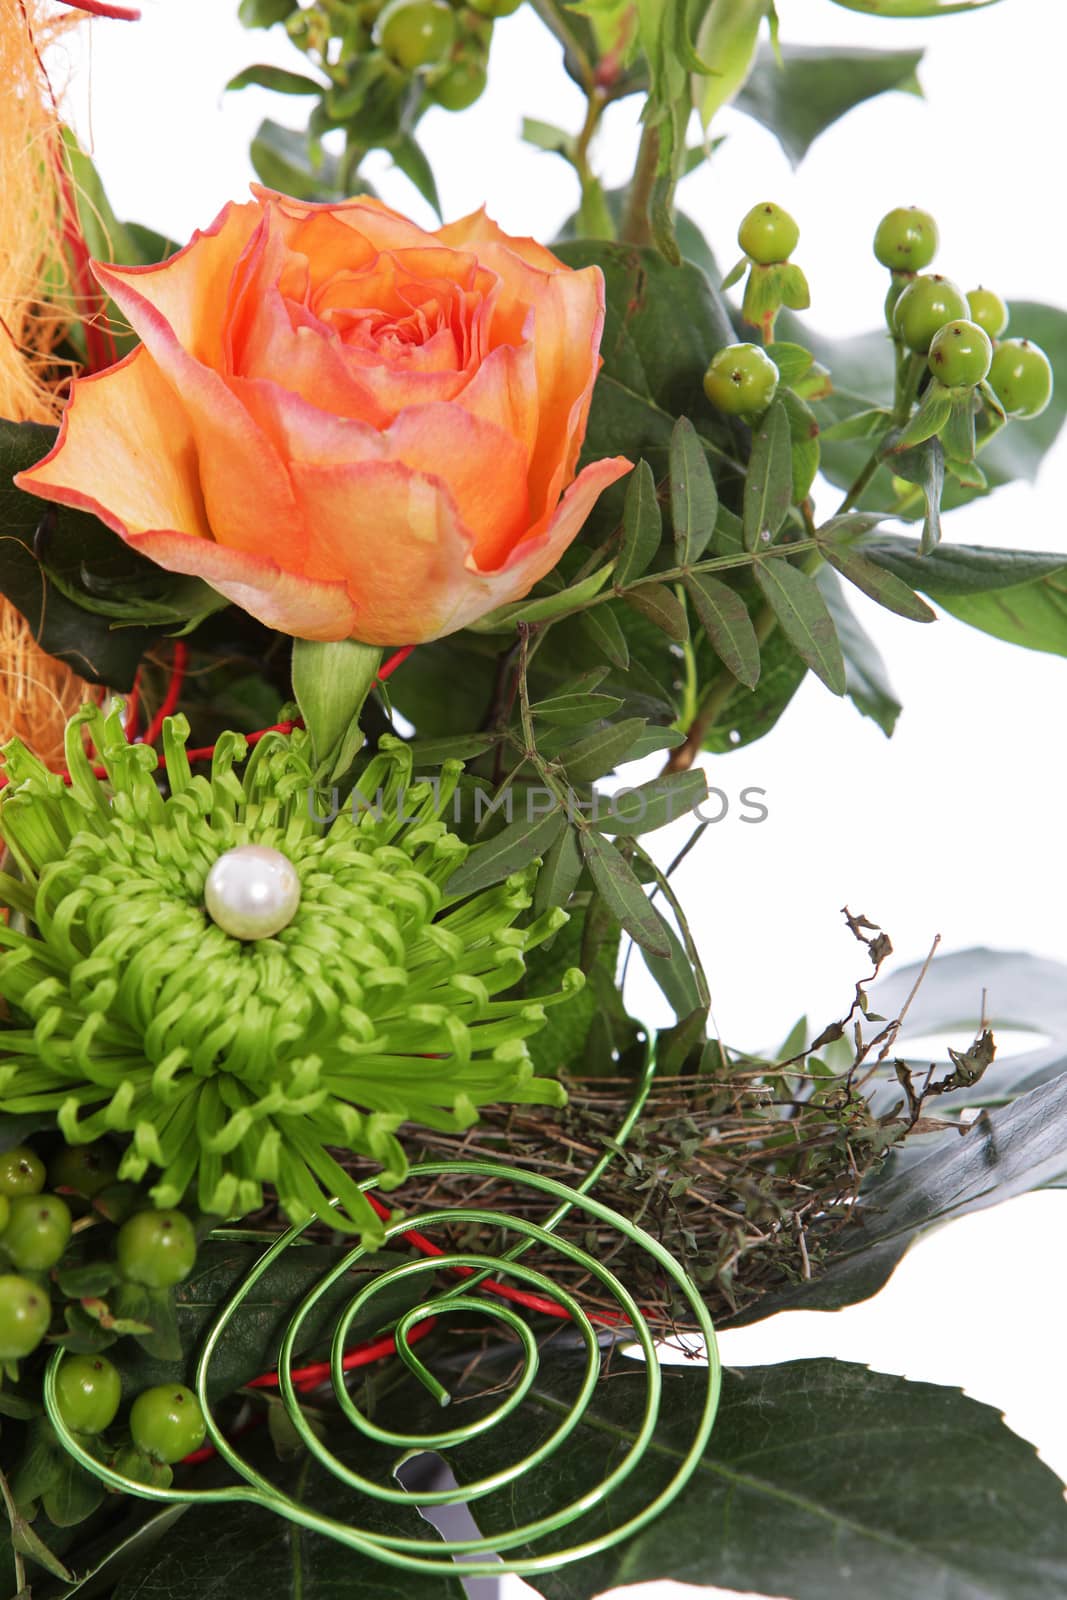 Flowers in a creative wedding display with spiral wires and a pearl on greenery with an orange rose